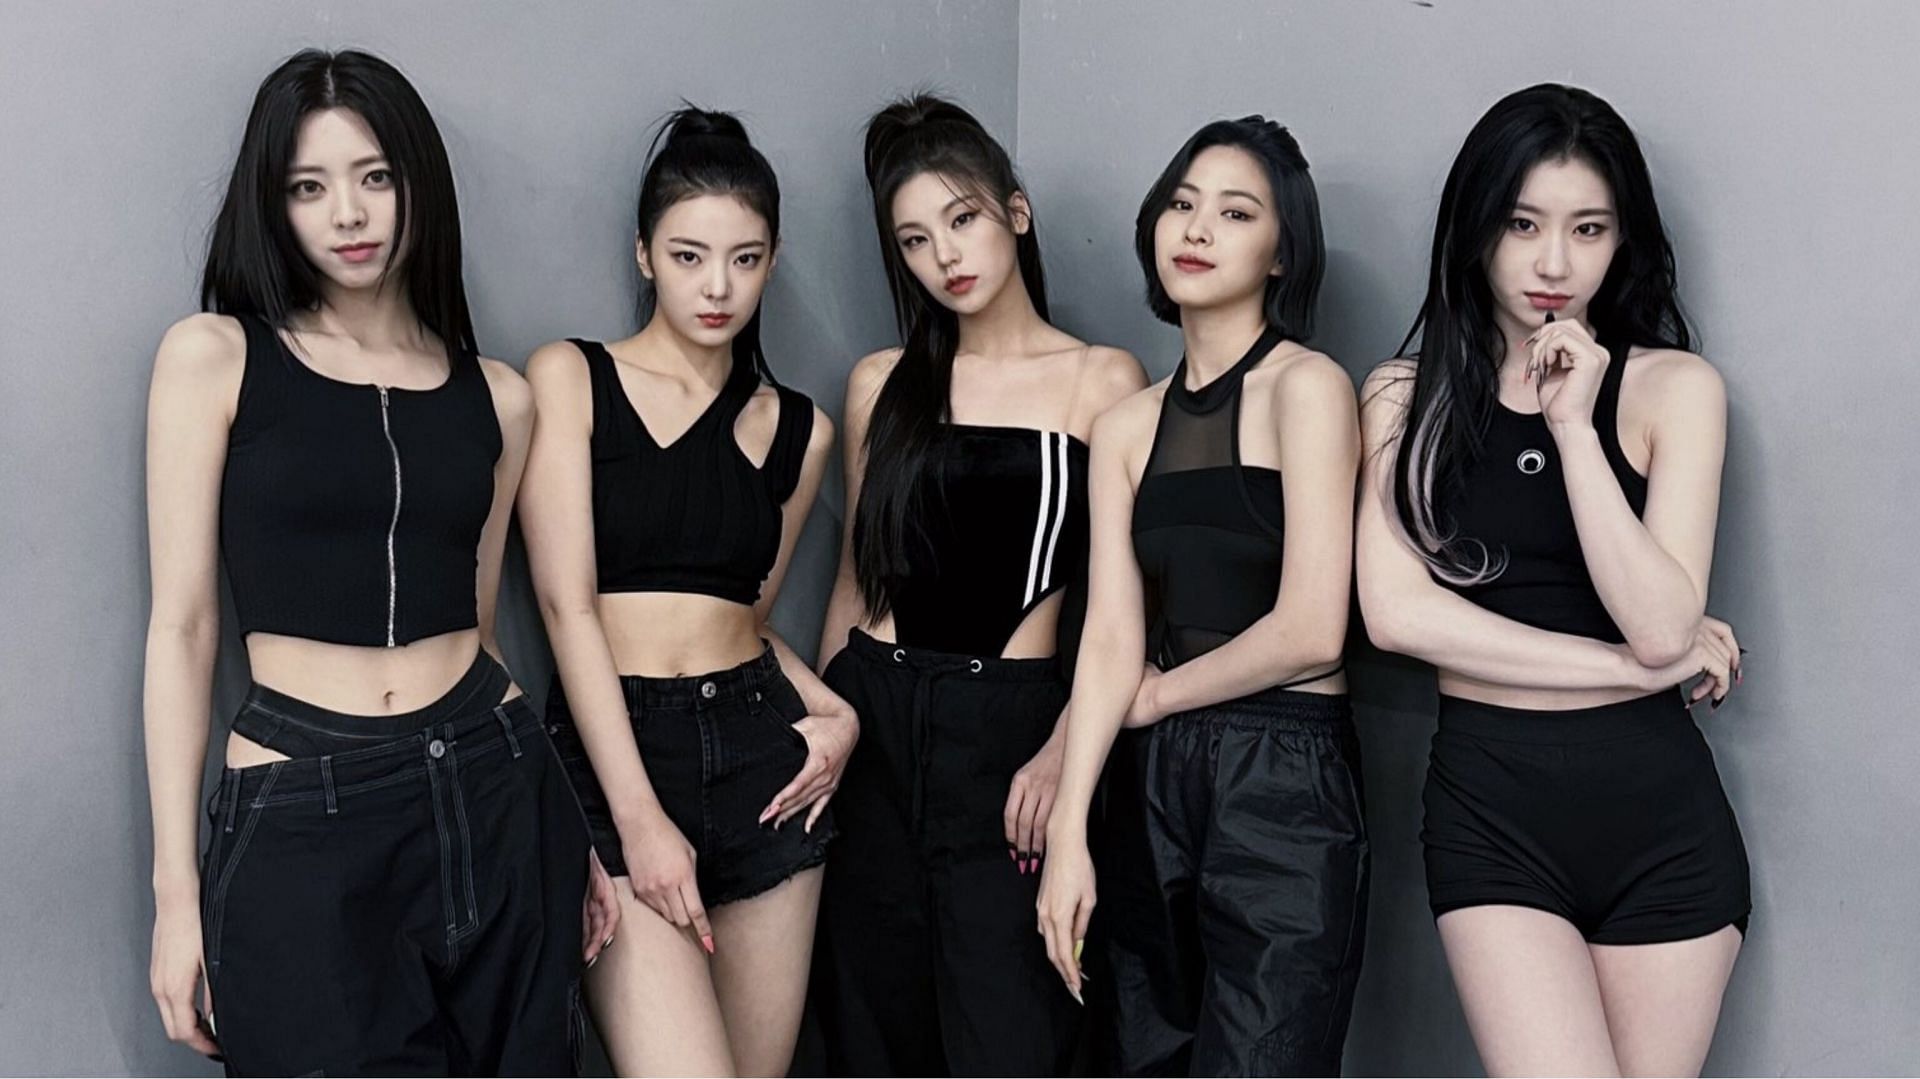 Image featuring ITZY members (Image via ITZY official twitter account)